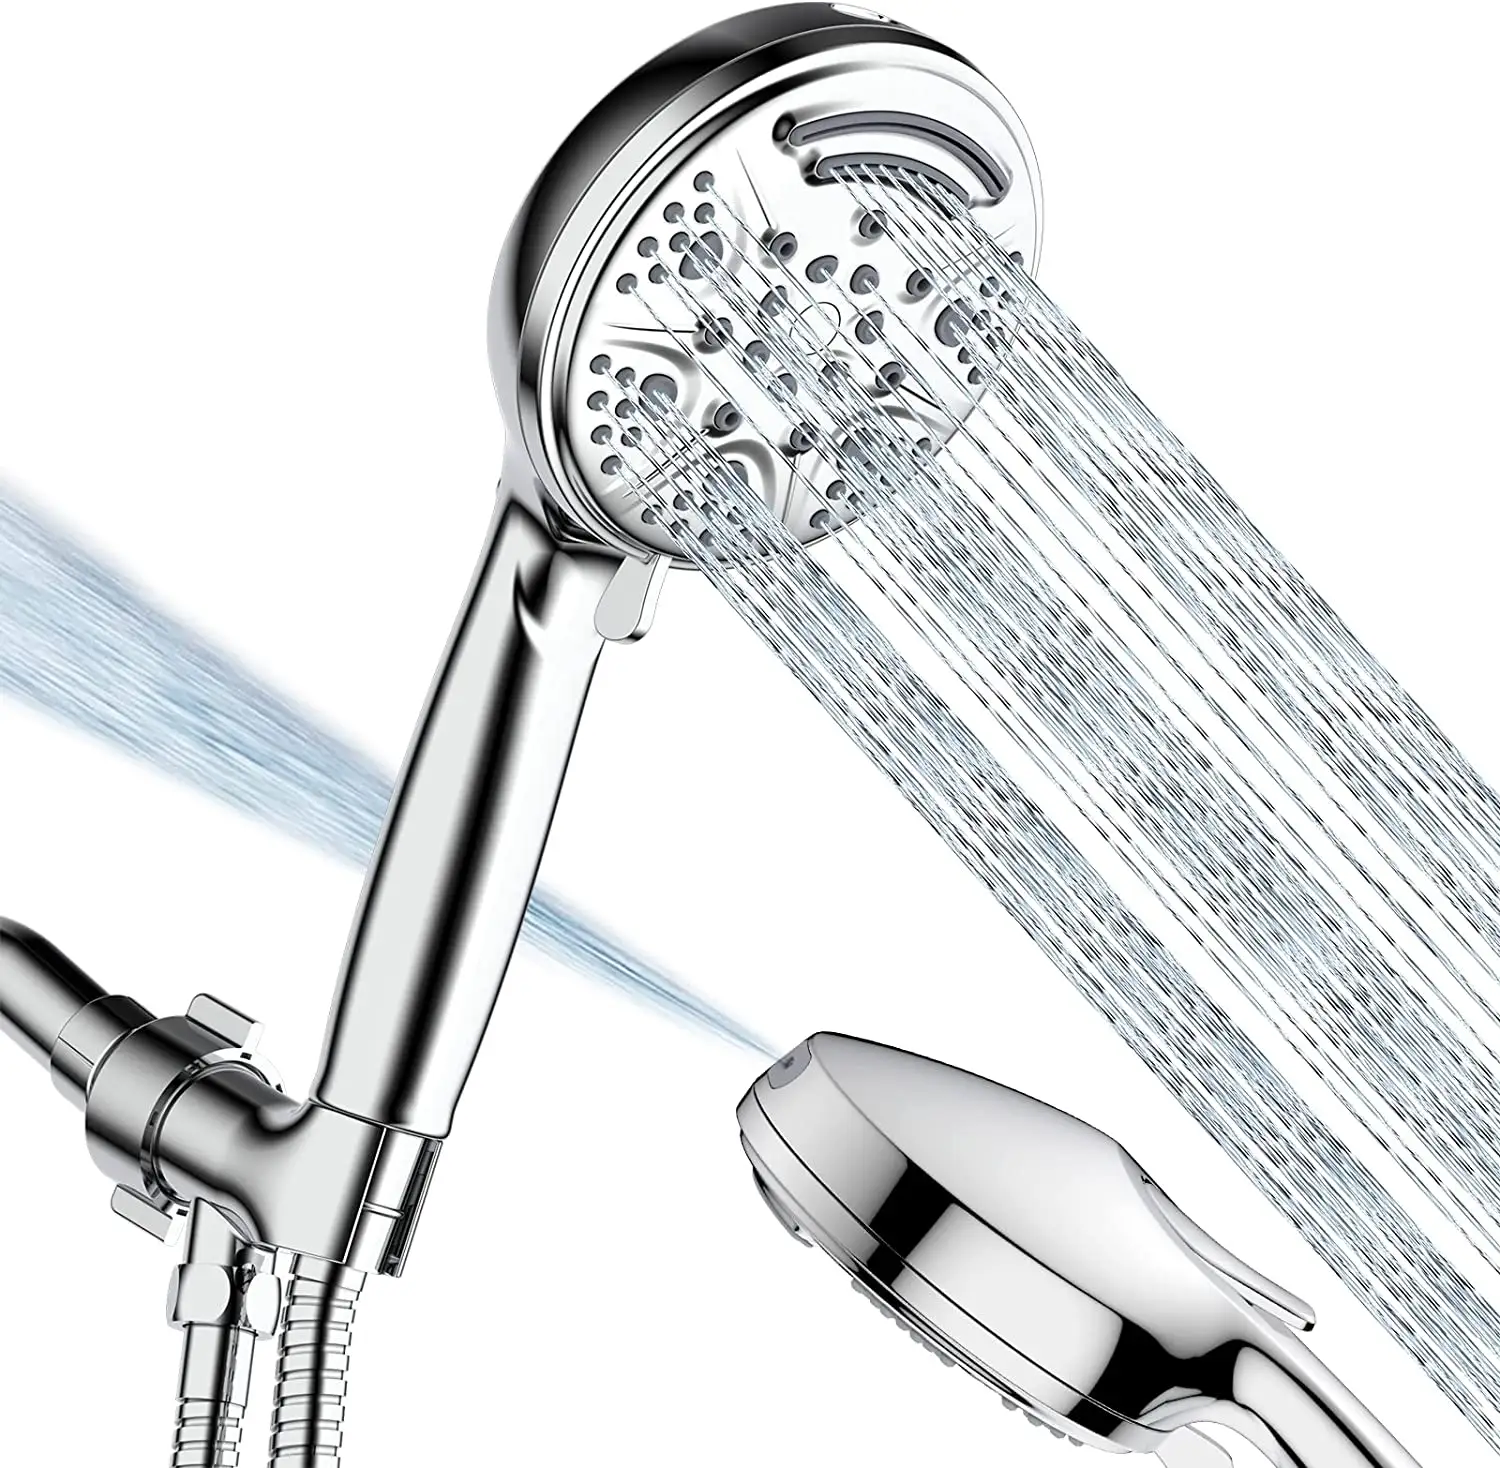 9 Function Settings Handheld Shower Head with Power Jet Wash Modes High Pressure 9 Spray Shower Heads